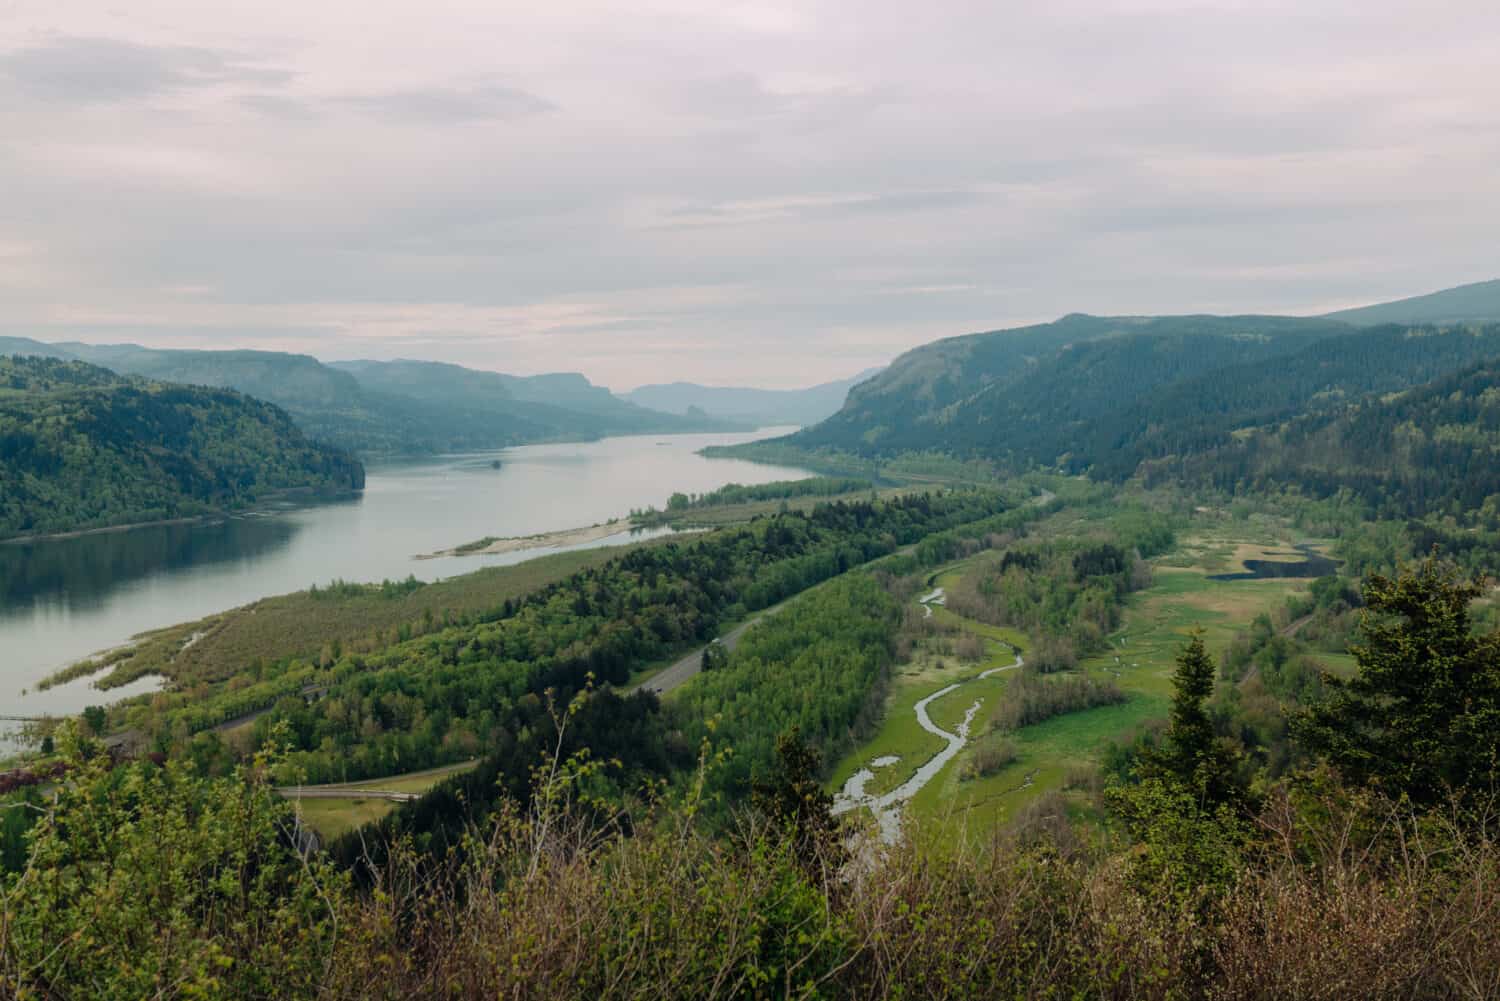 Crown Point Vista House - Columbia River Gorge Viewpoints